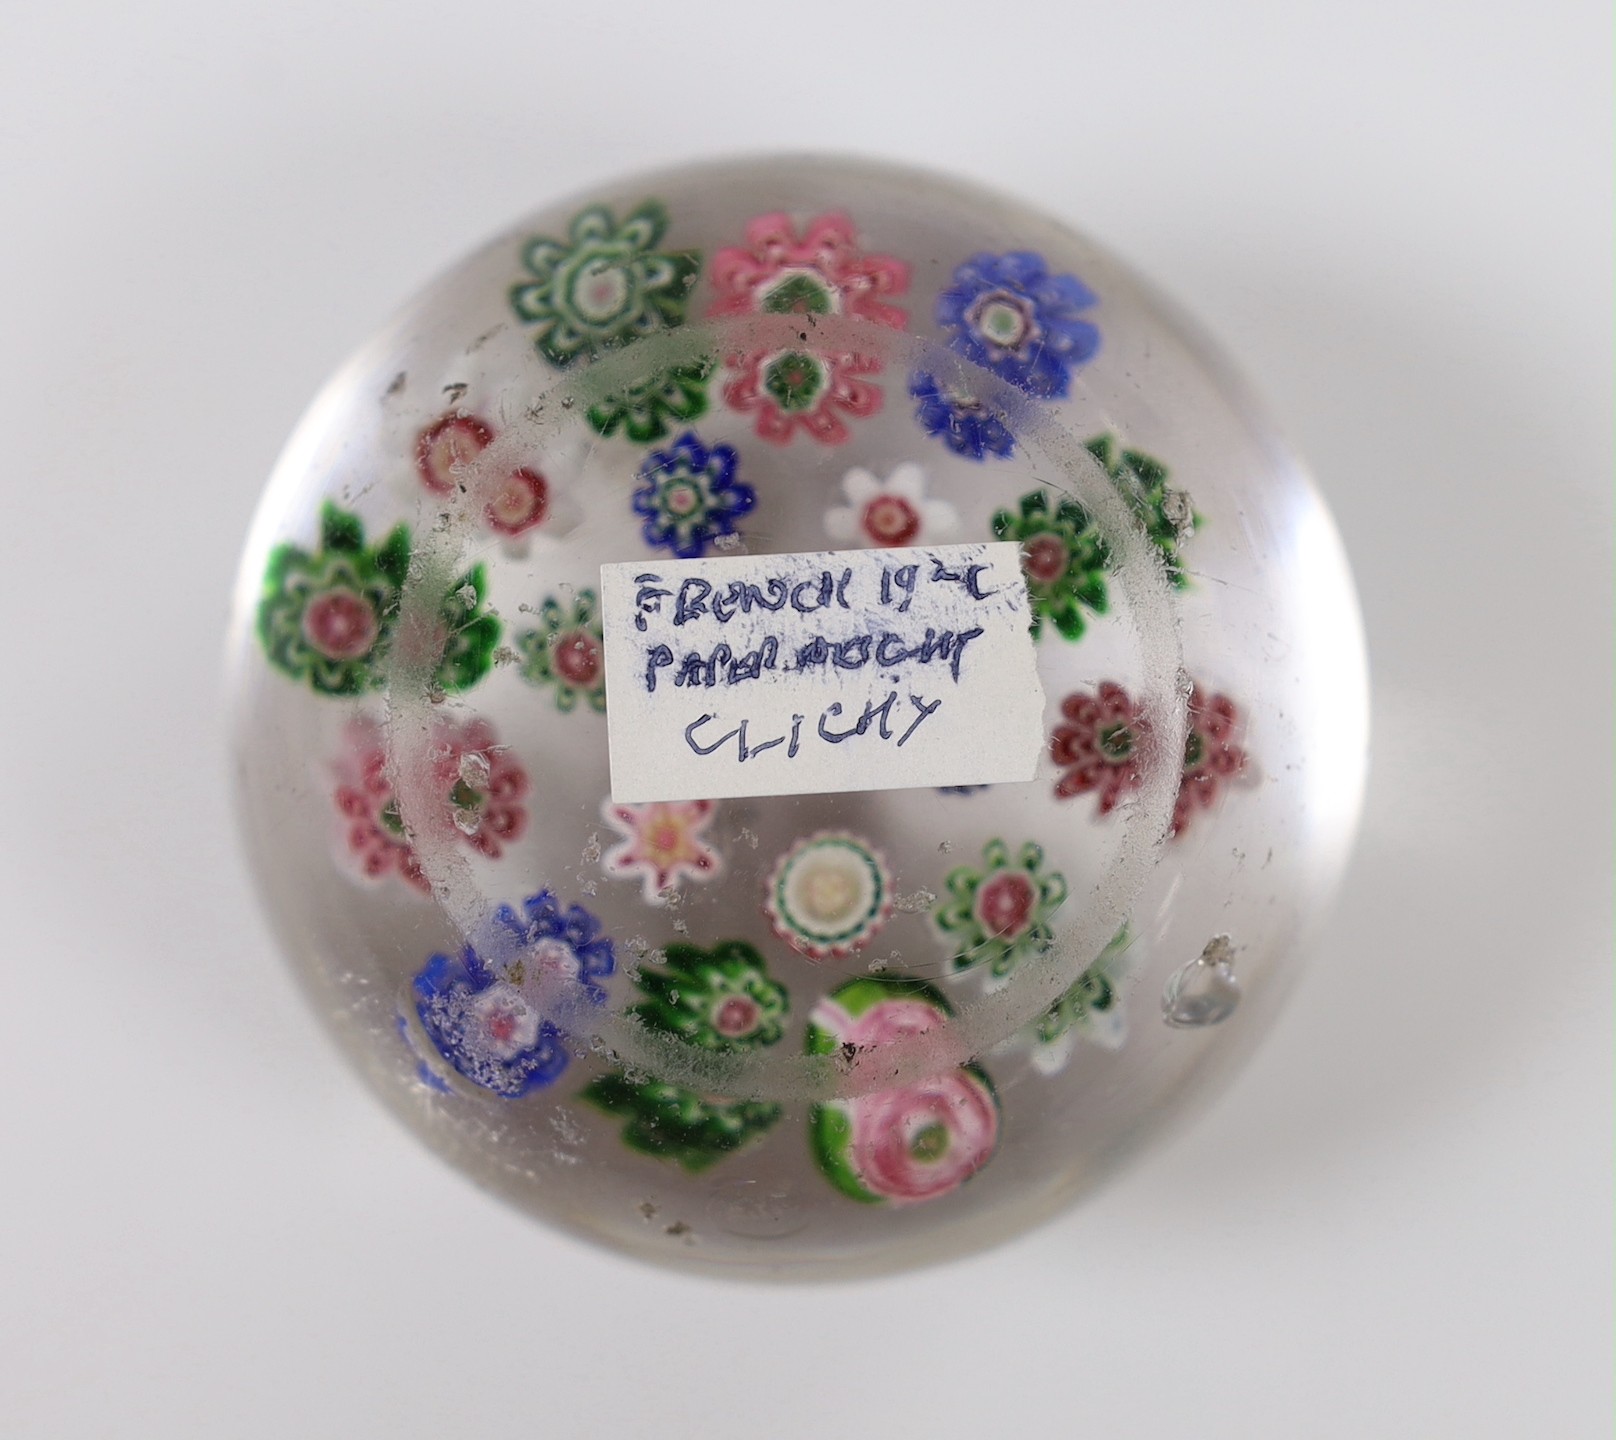 A Clichy glass paperweight